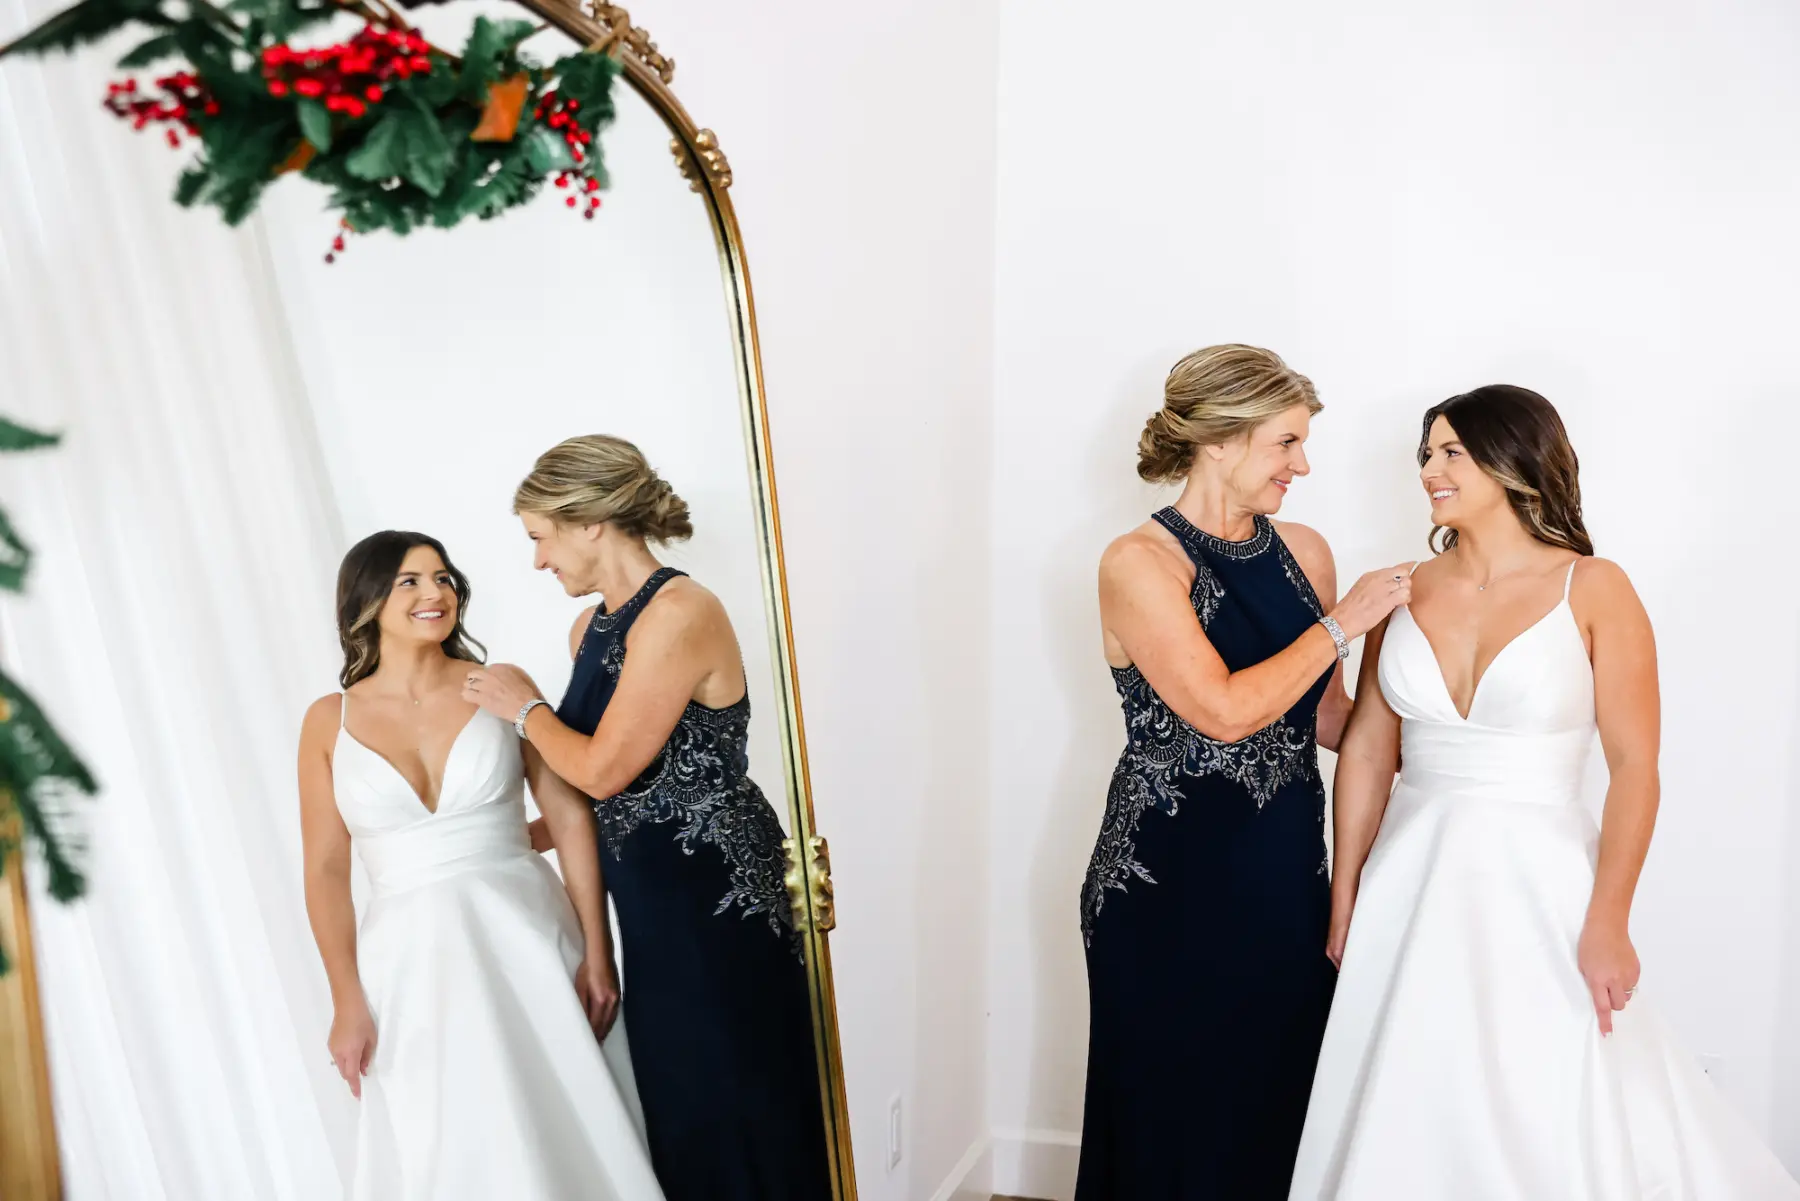 Bride and Mother Getting Ready Wedding Portrait | Classic White A Line Martina Liana Wedding Dress Inspiration | Tampa Bay Hair and Makeup Artist Adore Bridal Hair and Makeup